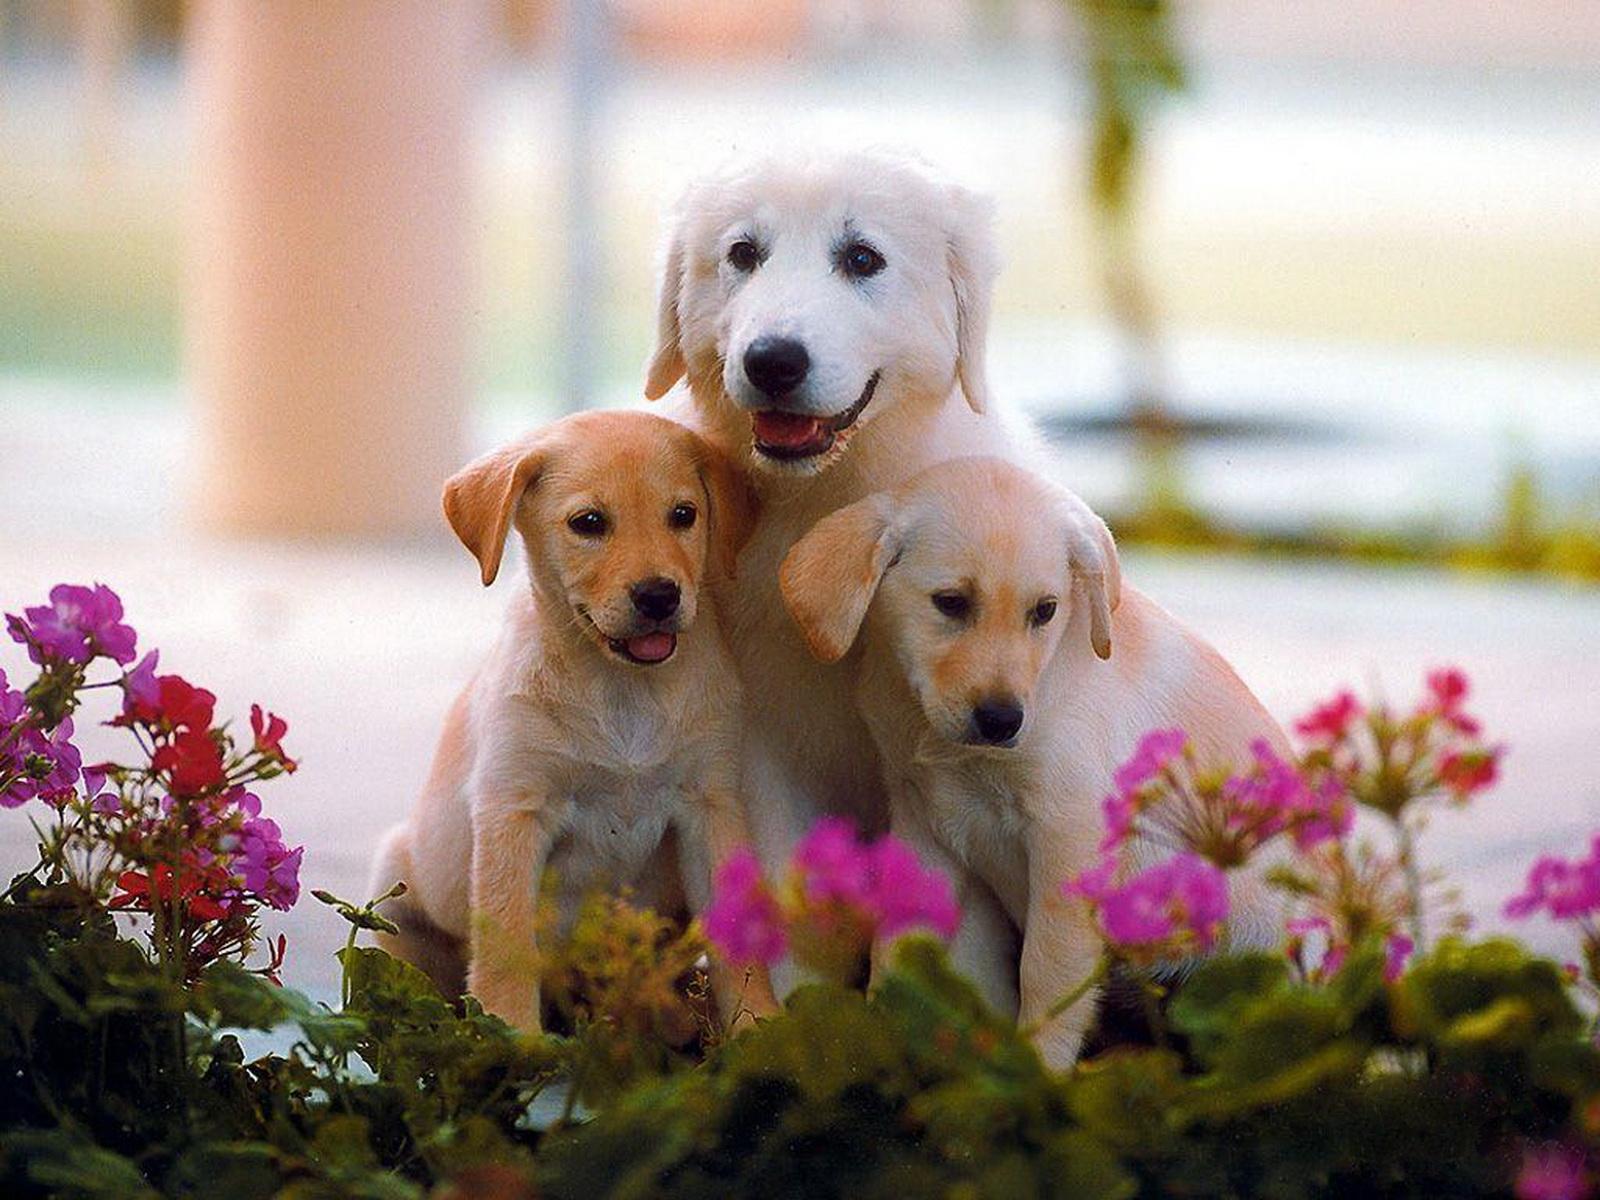 Cute Dogs Image Wallpaper Download